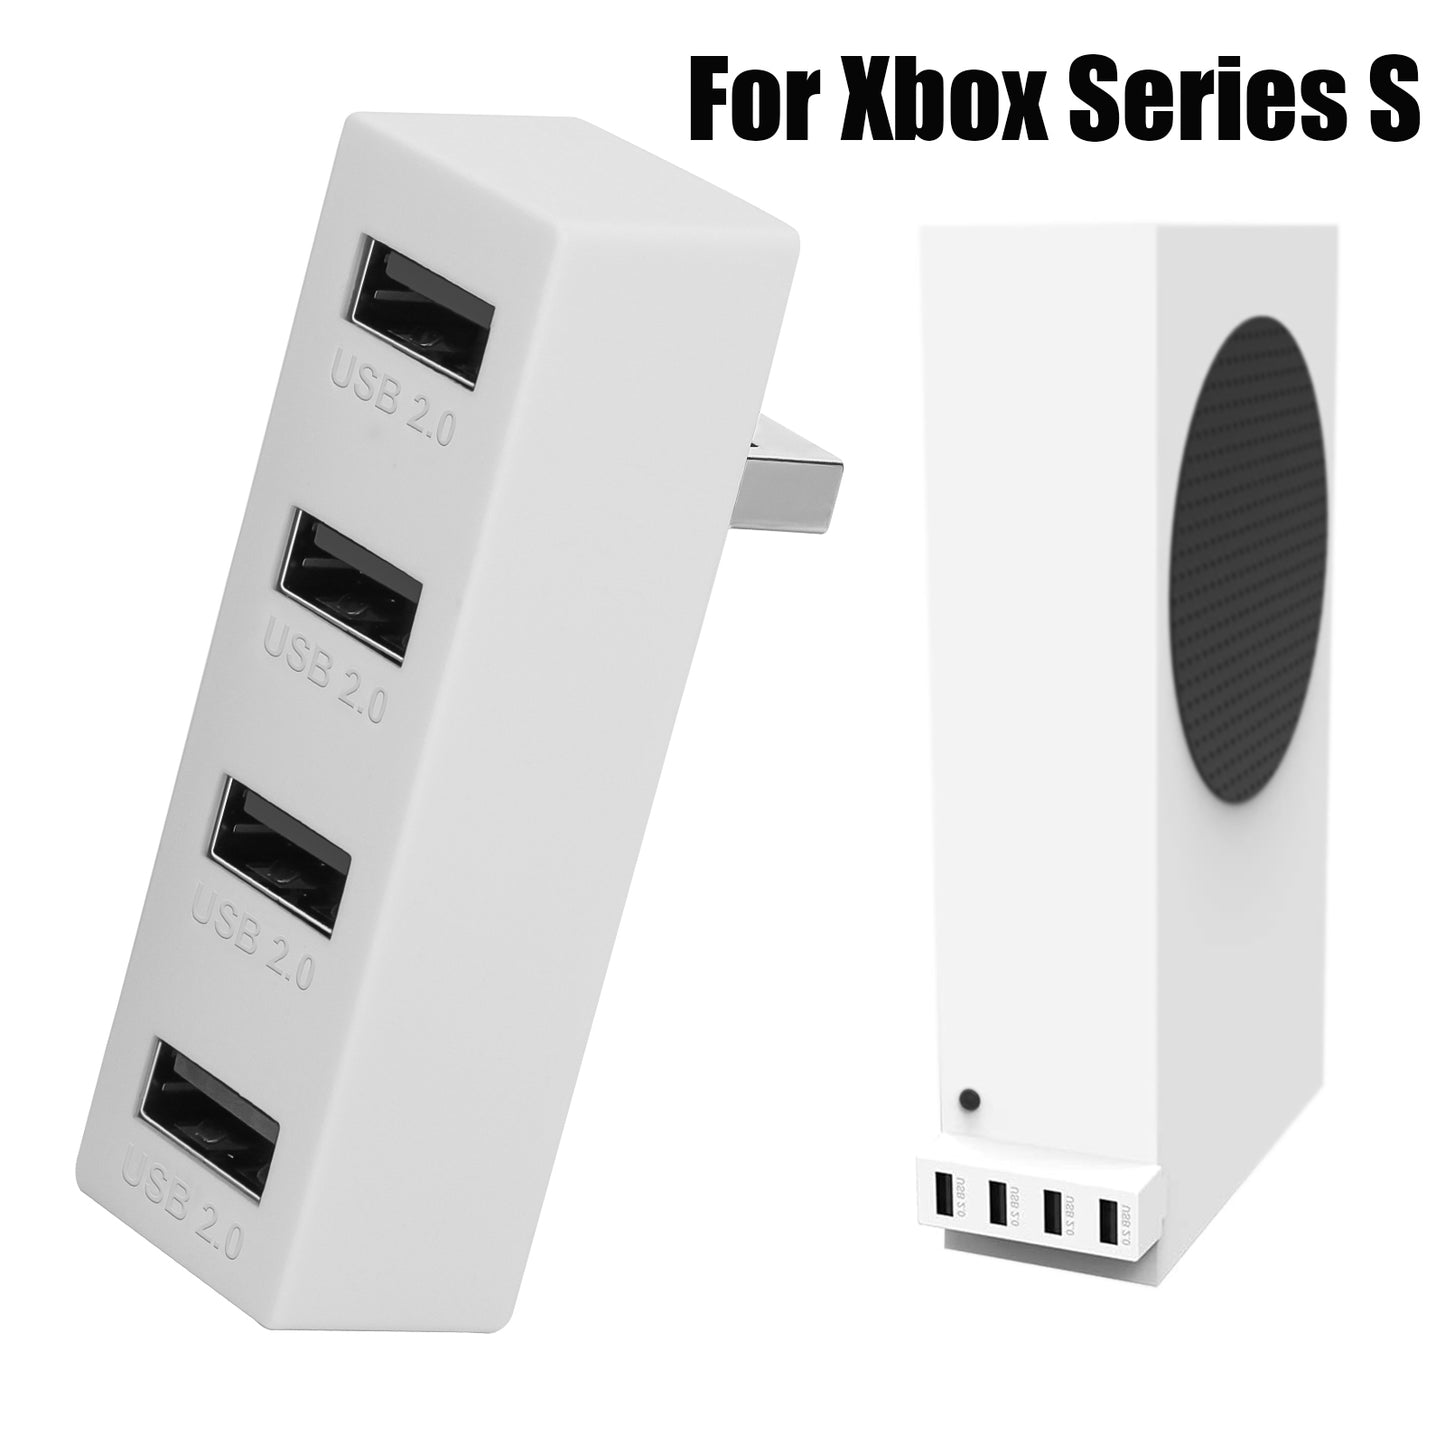 4 Ports USB Hub 2.0 for Xbox Series S - Lightweight & Compact Design - Seamless Connectivity for Controllers, Keyboards, and More,Stable Data Transmission, Plug and Play Convenience（white）